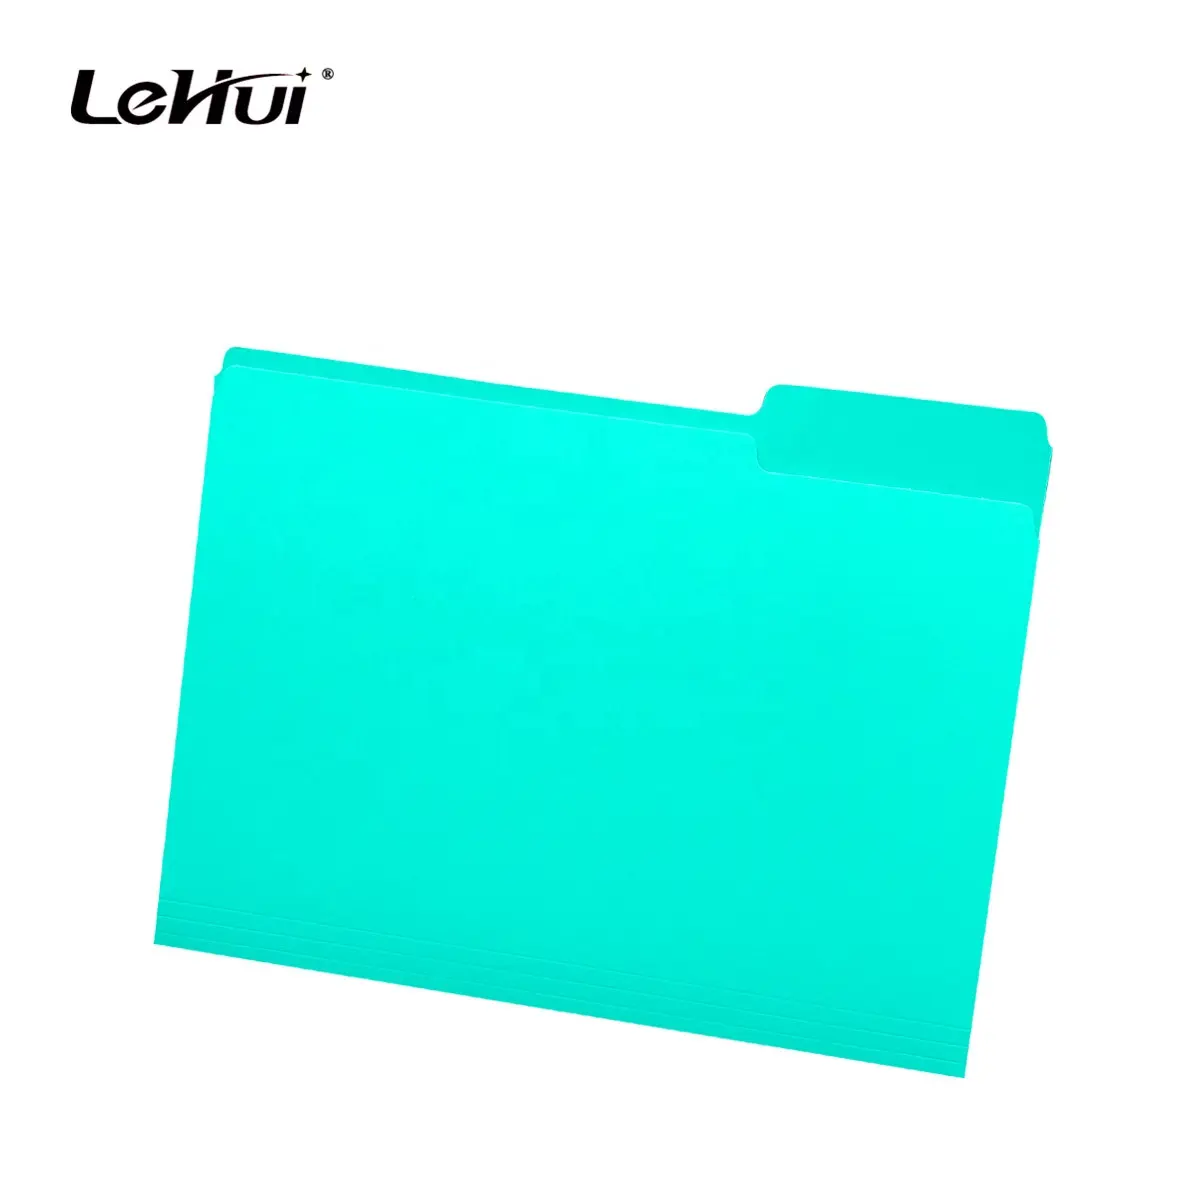 2020 New Product 100 Pack Green File Folders 1/3 Cut Tab Letter/Legal Size Great for Organizing and Easy File Storage